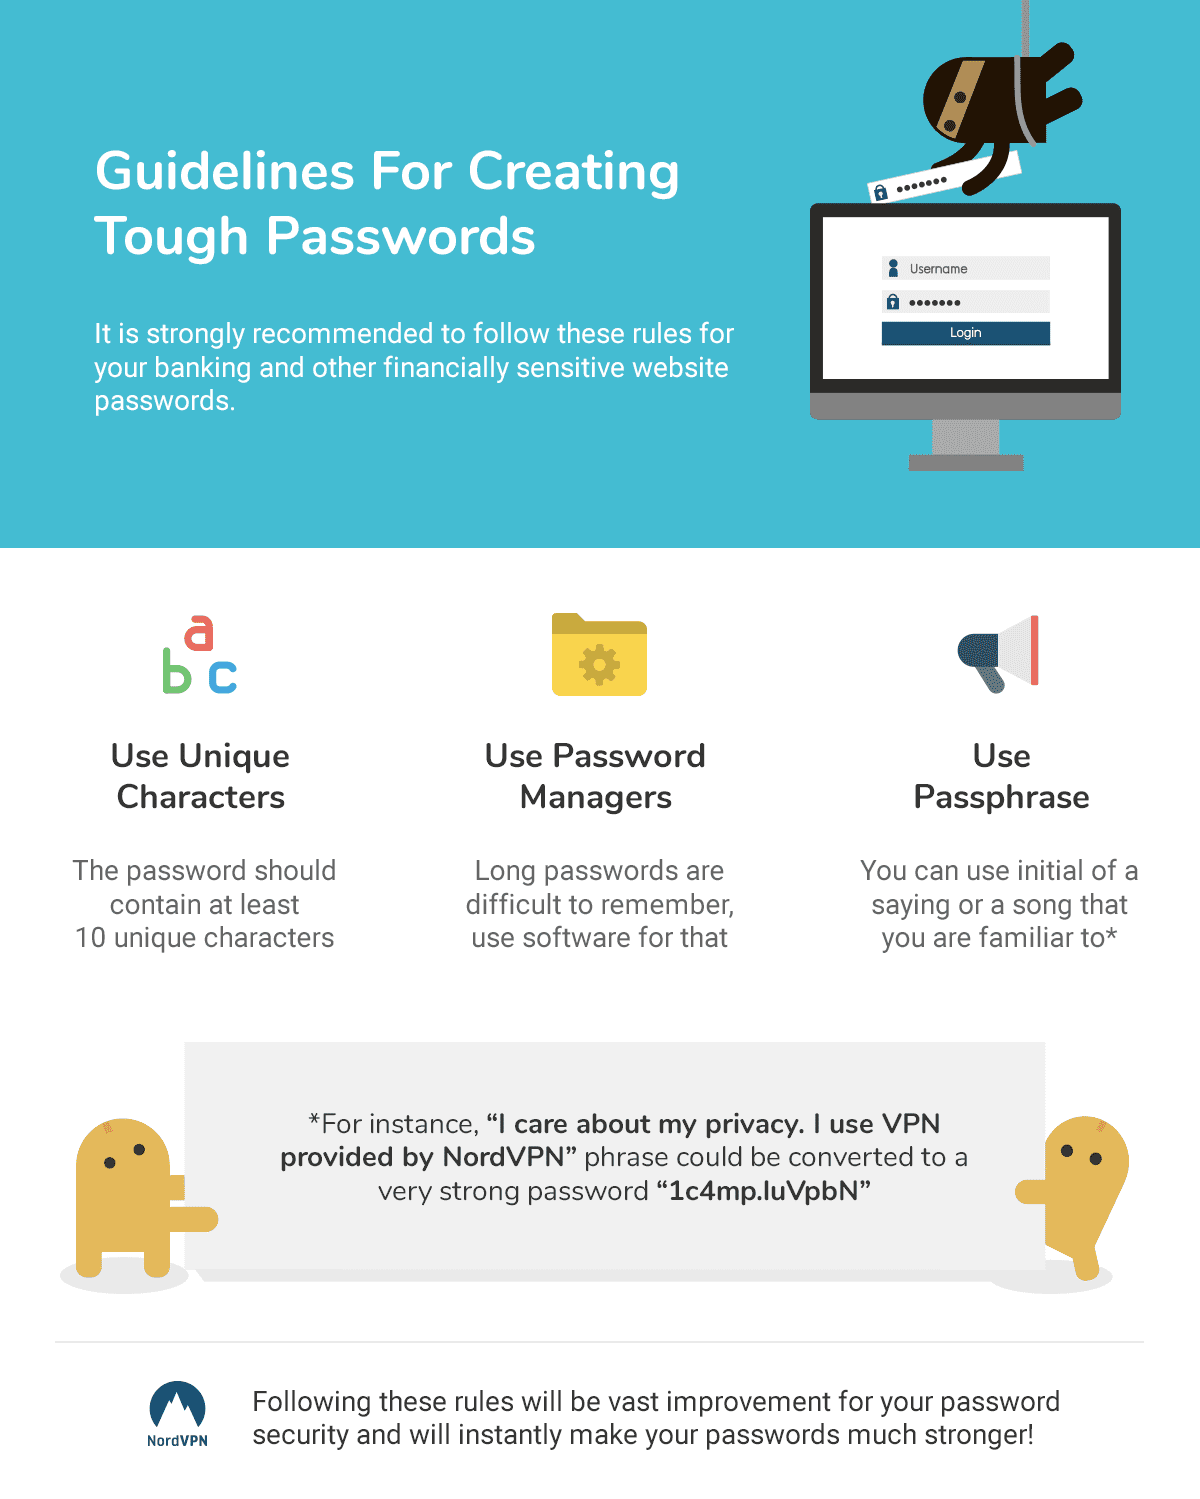 Tough passwords guidelines by NordVPN